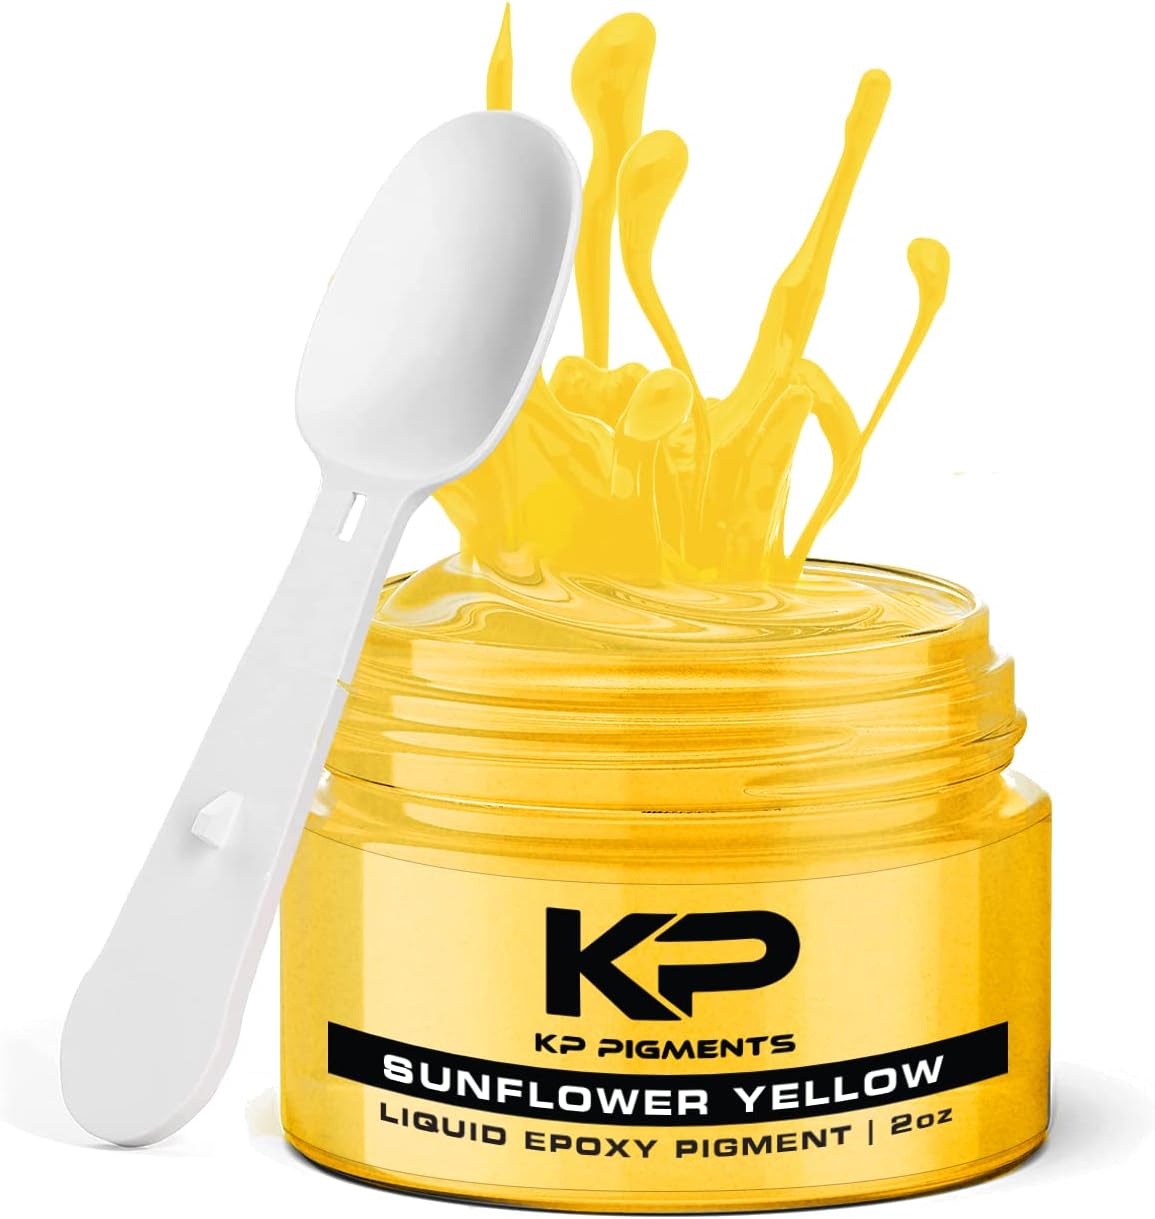 Load image into Gallery viewer, Sunflower Yellow - Epoxy Pigment Paste for Epoxy Resin, Tint/Pigment Paste with Spoon for Arts and Crafts, Jewelry, Resin Woodworking and More!